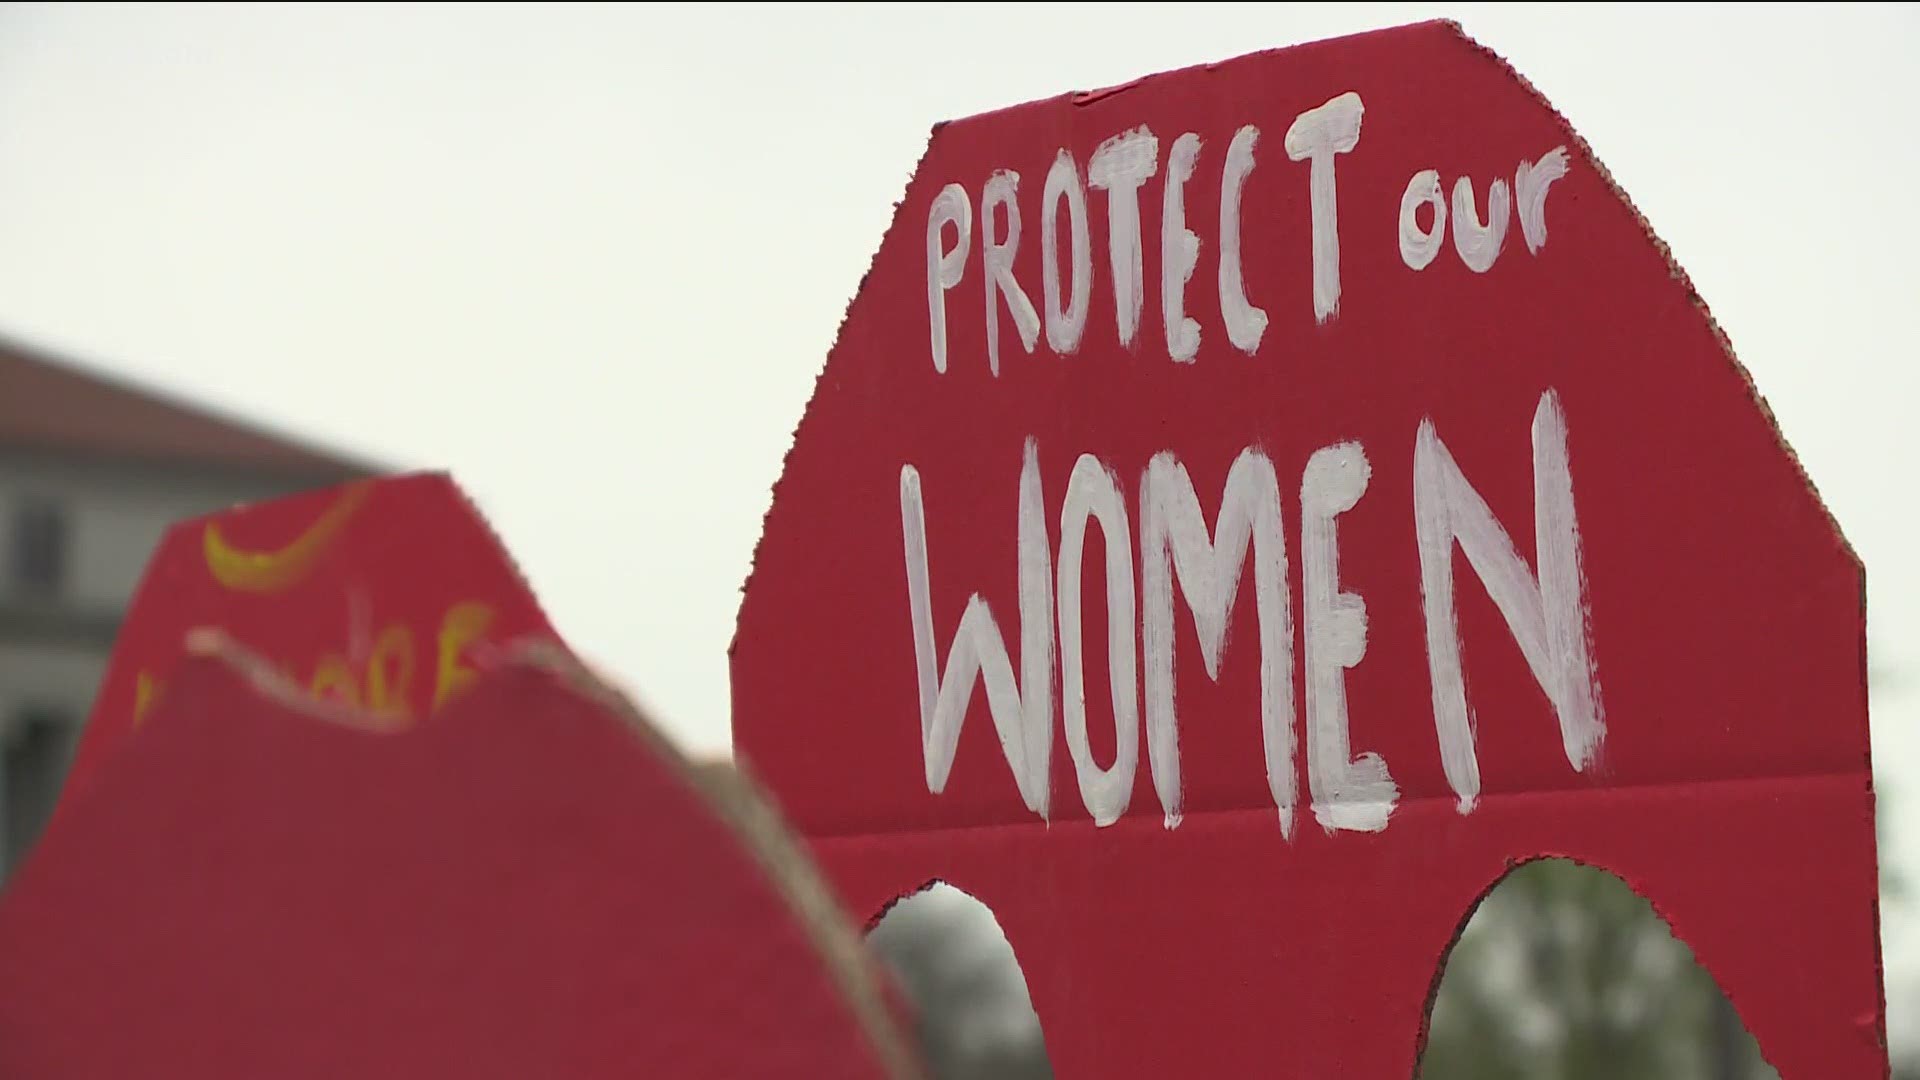 Thousands of red dresses were set out on the State Capitol lawn to help represent what’s happened historically to Native American women across the nation.